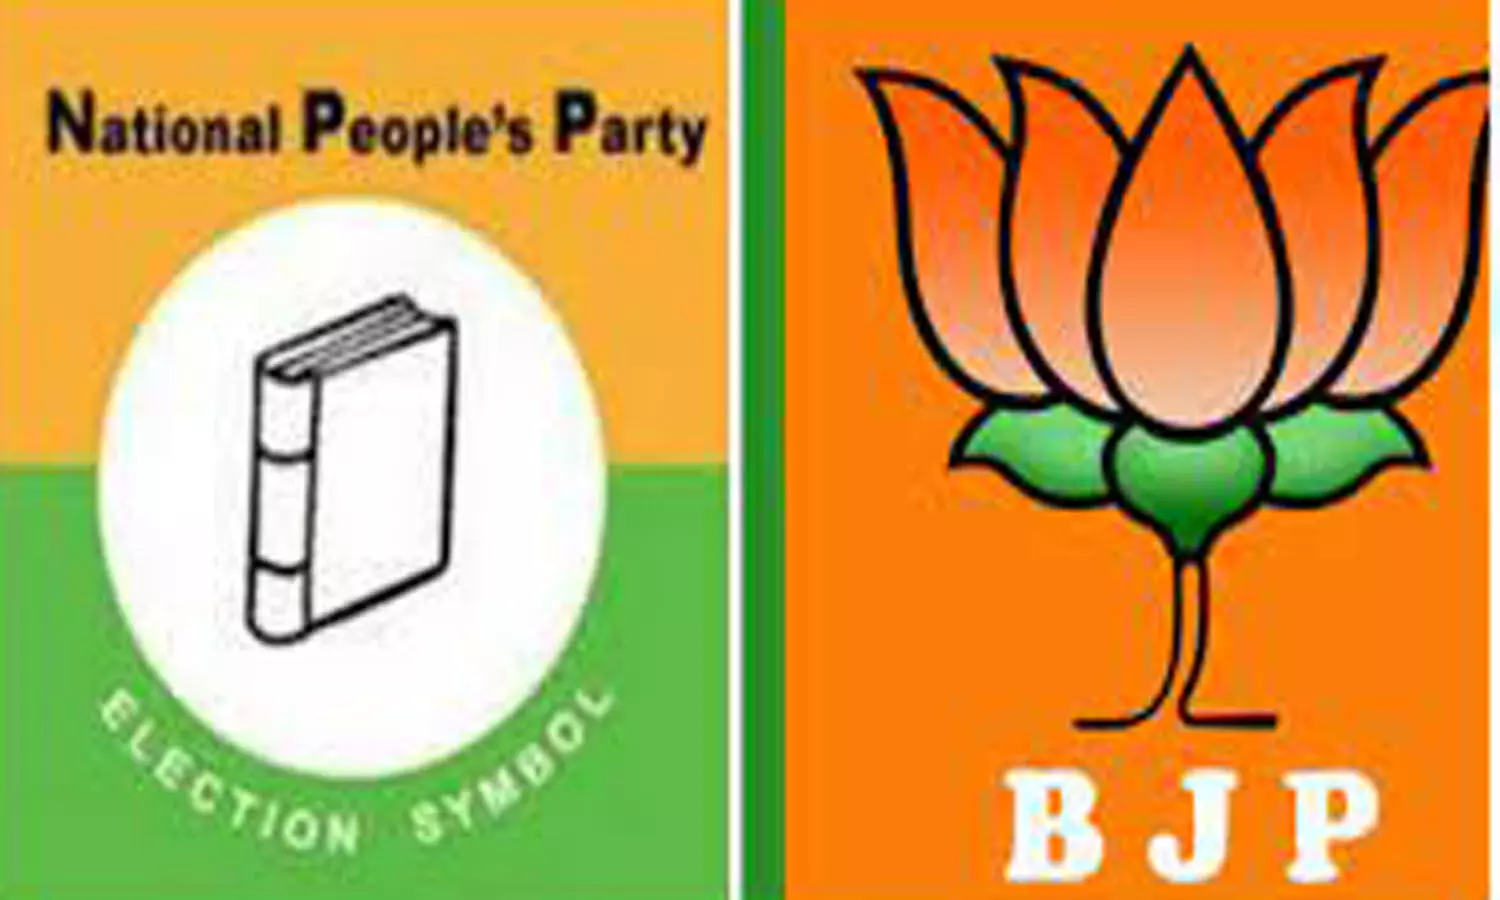 The NPP is giving tough competition to BJP in the Manipur election